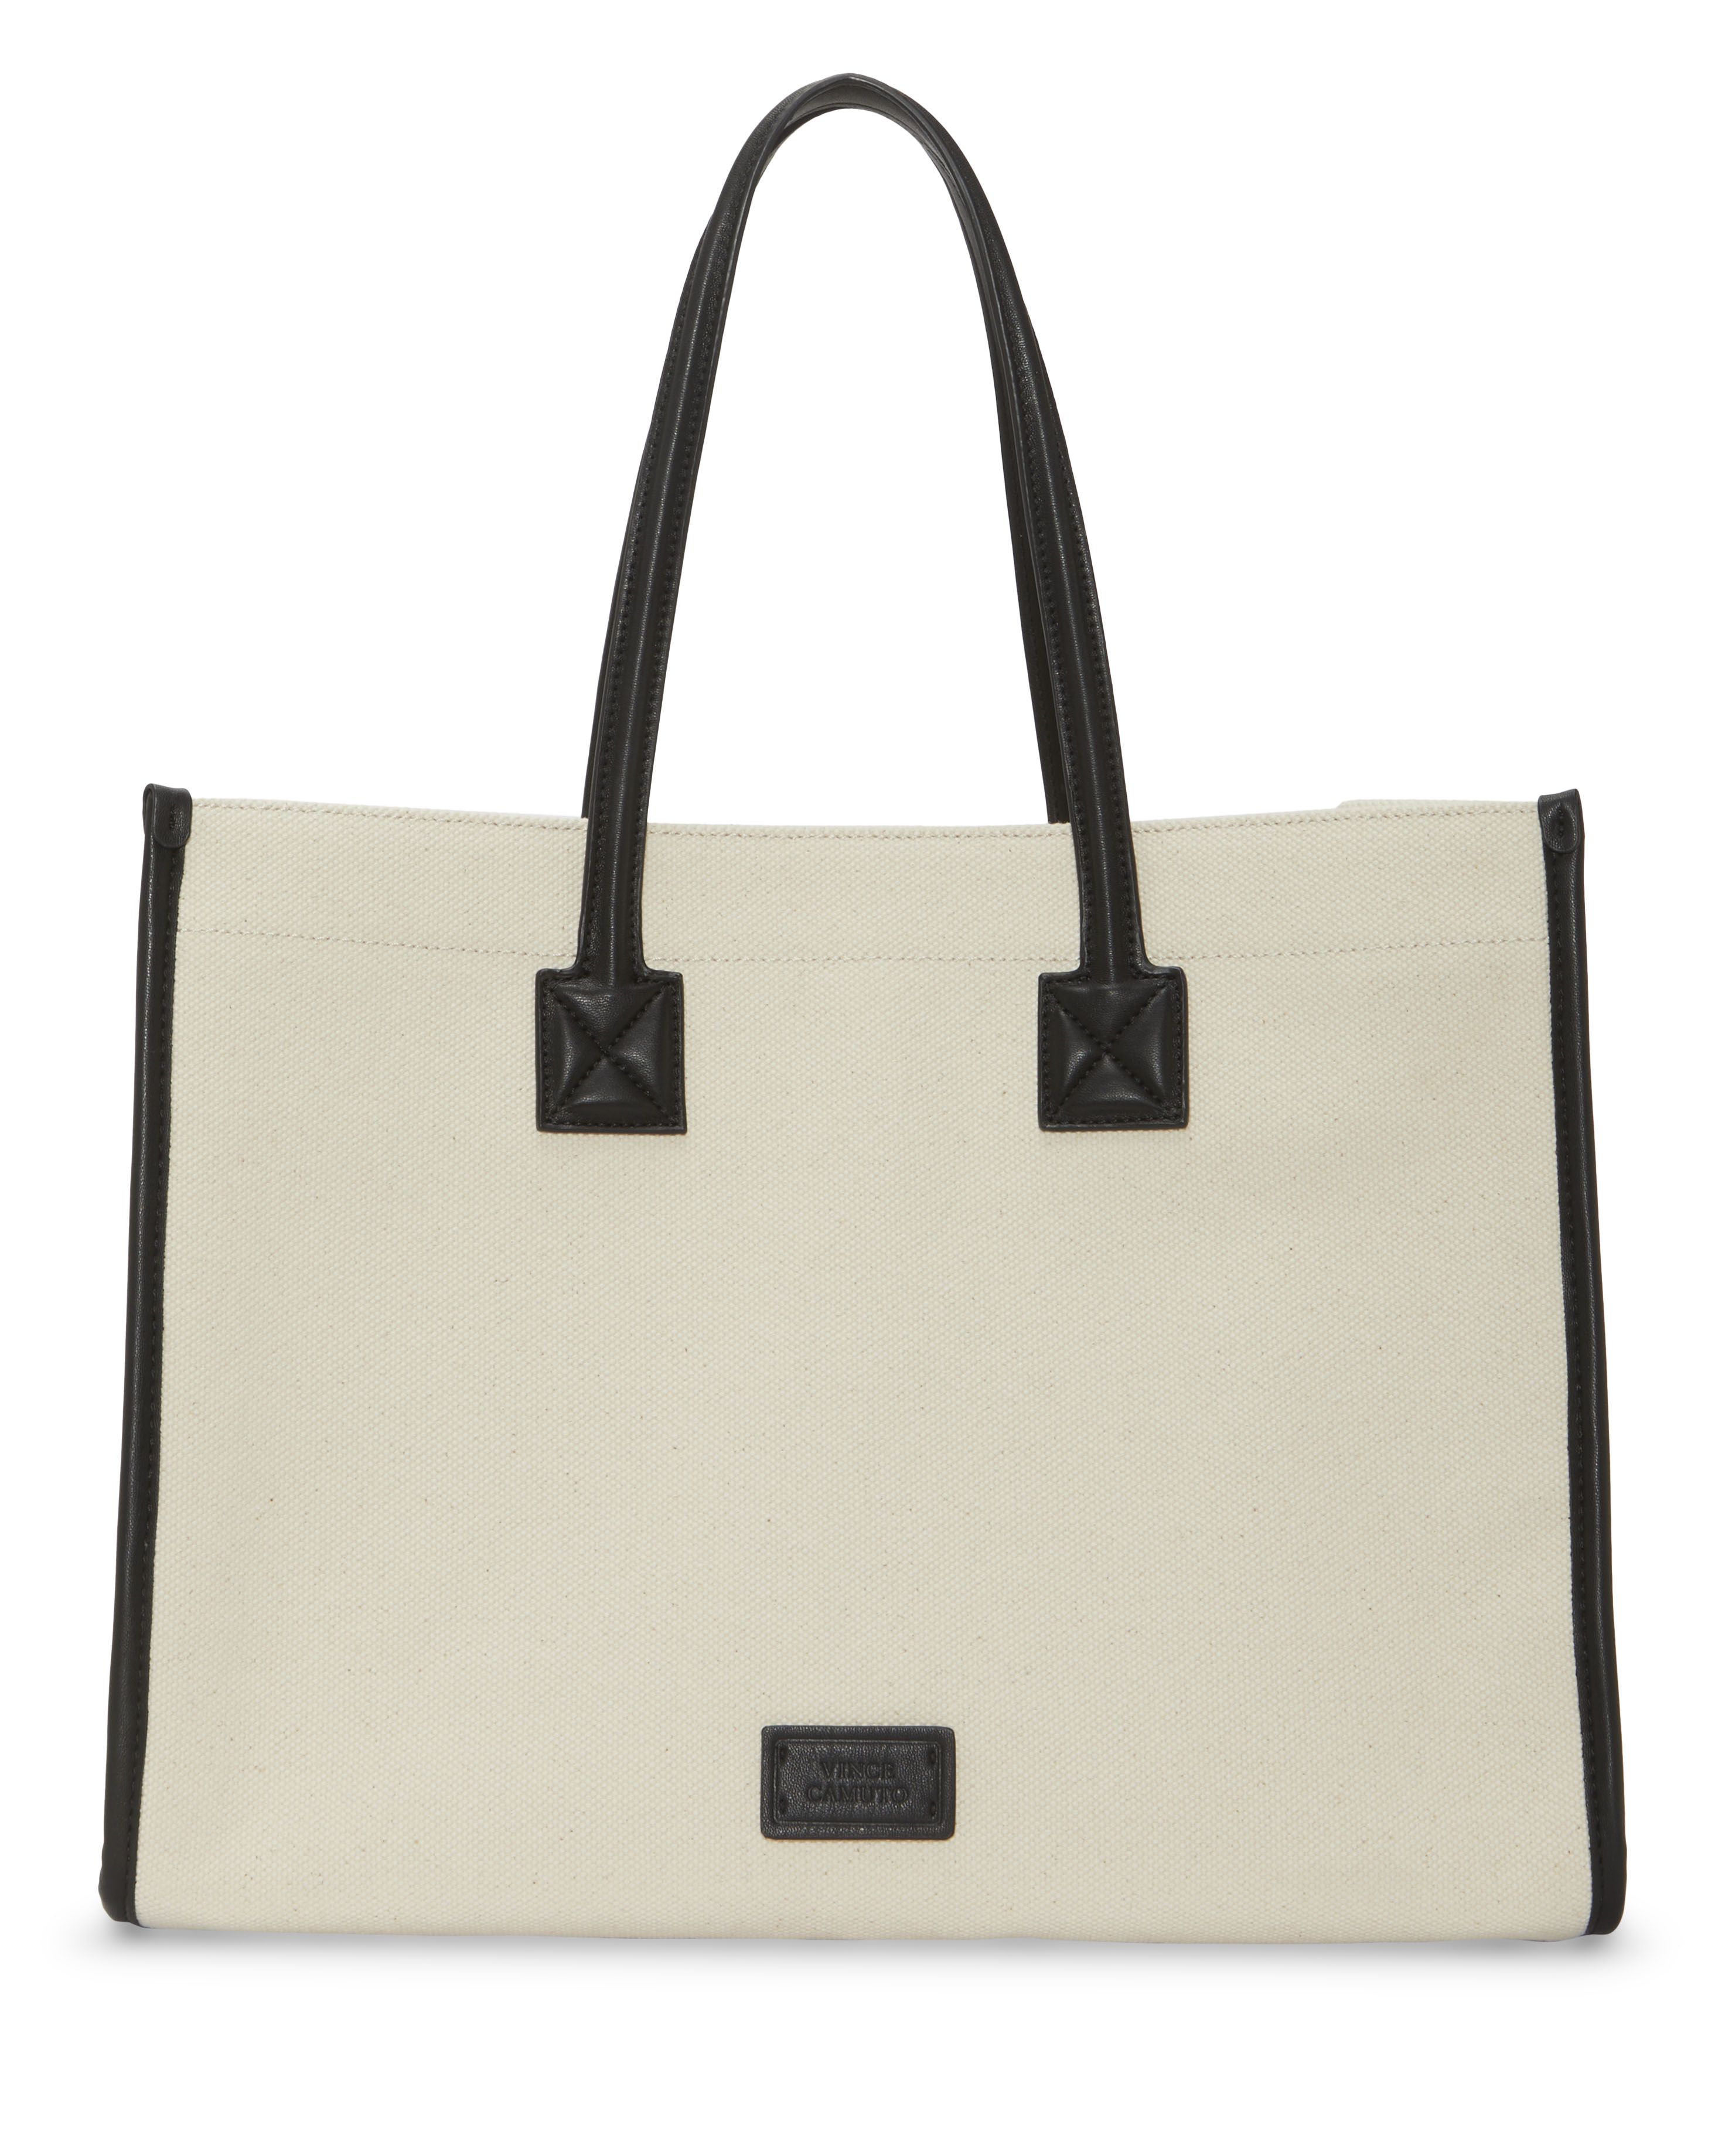 Vince Camuto Saly Tote | Vince Camuto